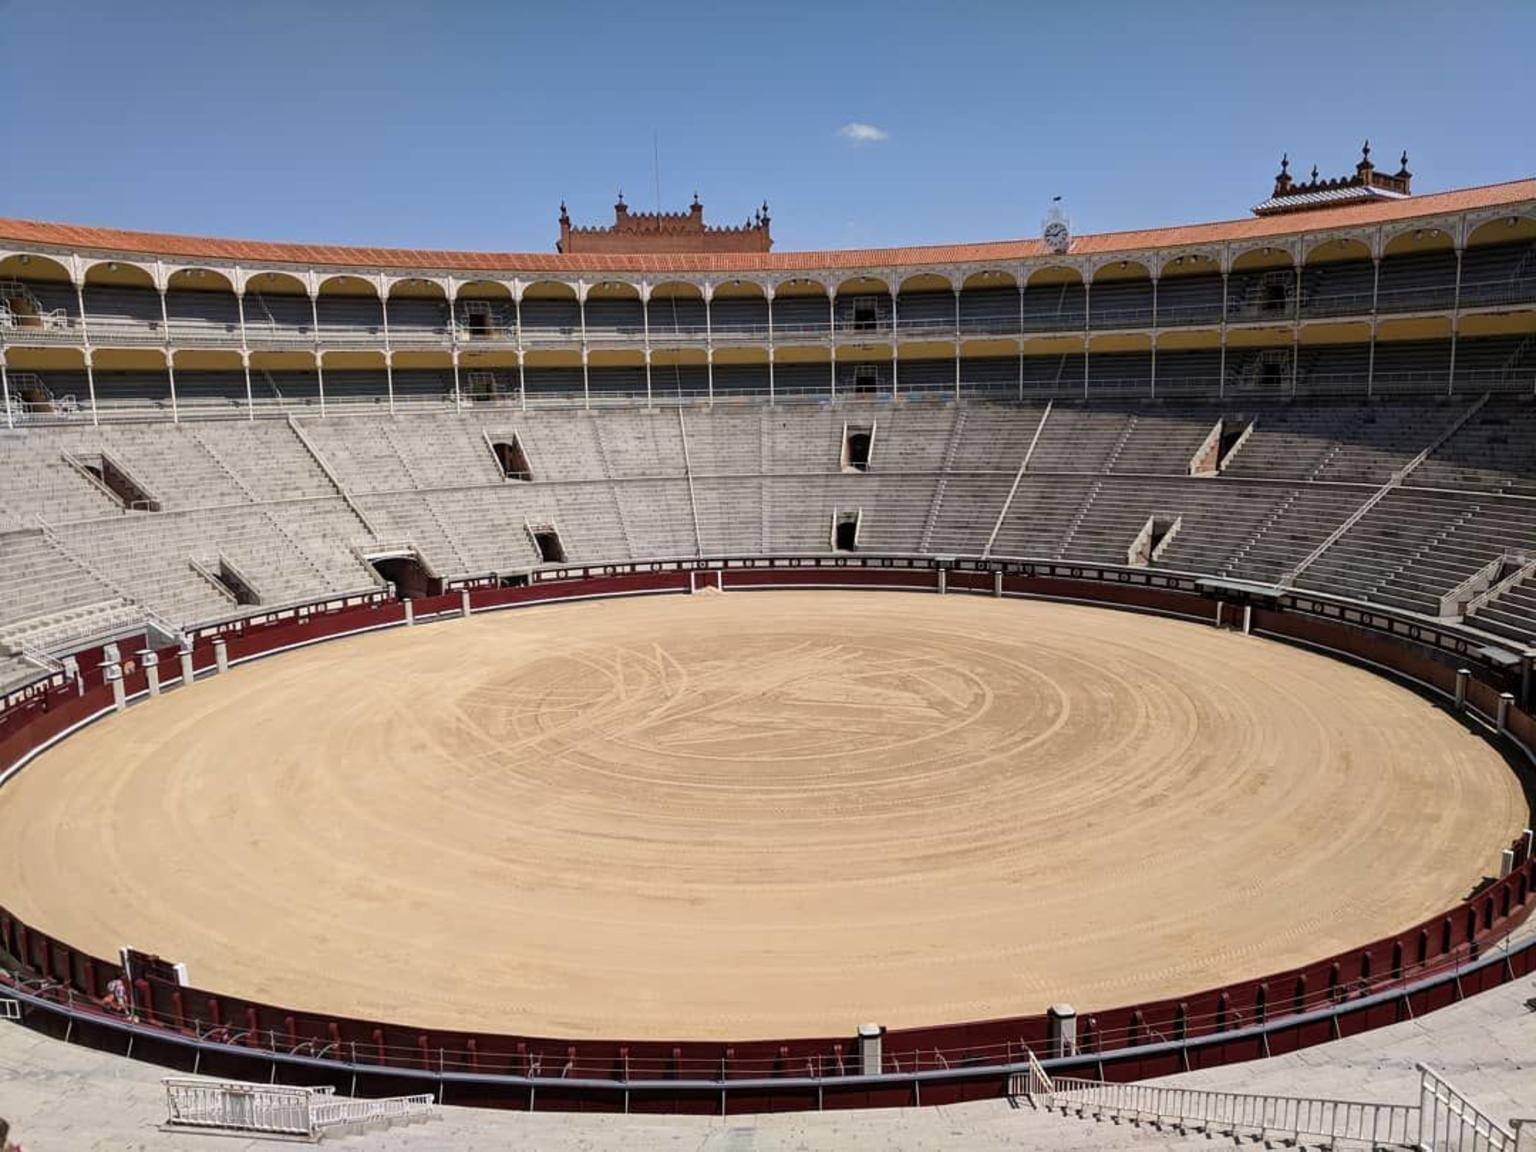 Take a day from your Madrid itinerary and explore this bullfighting arena